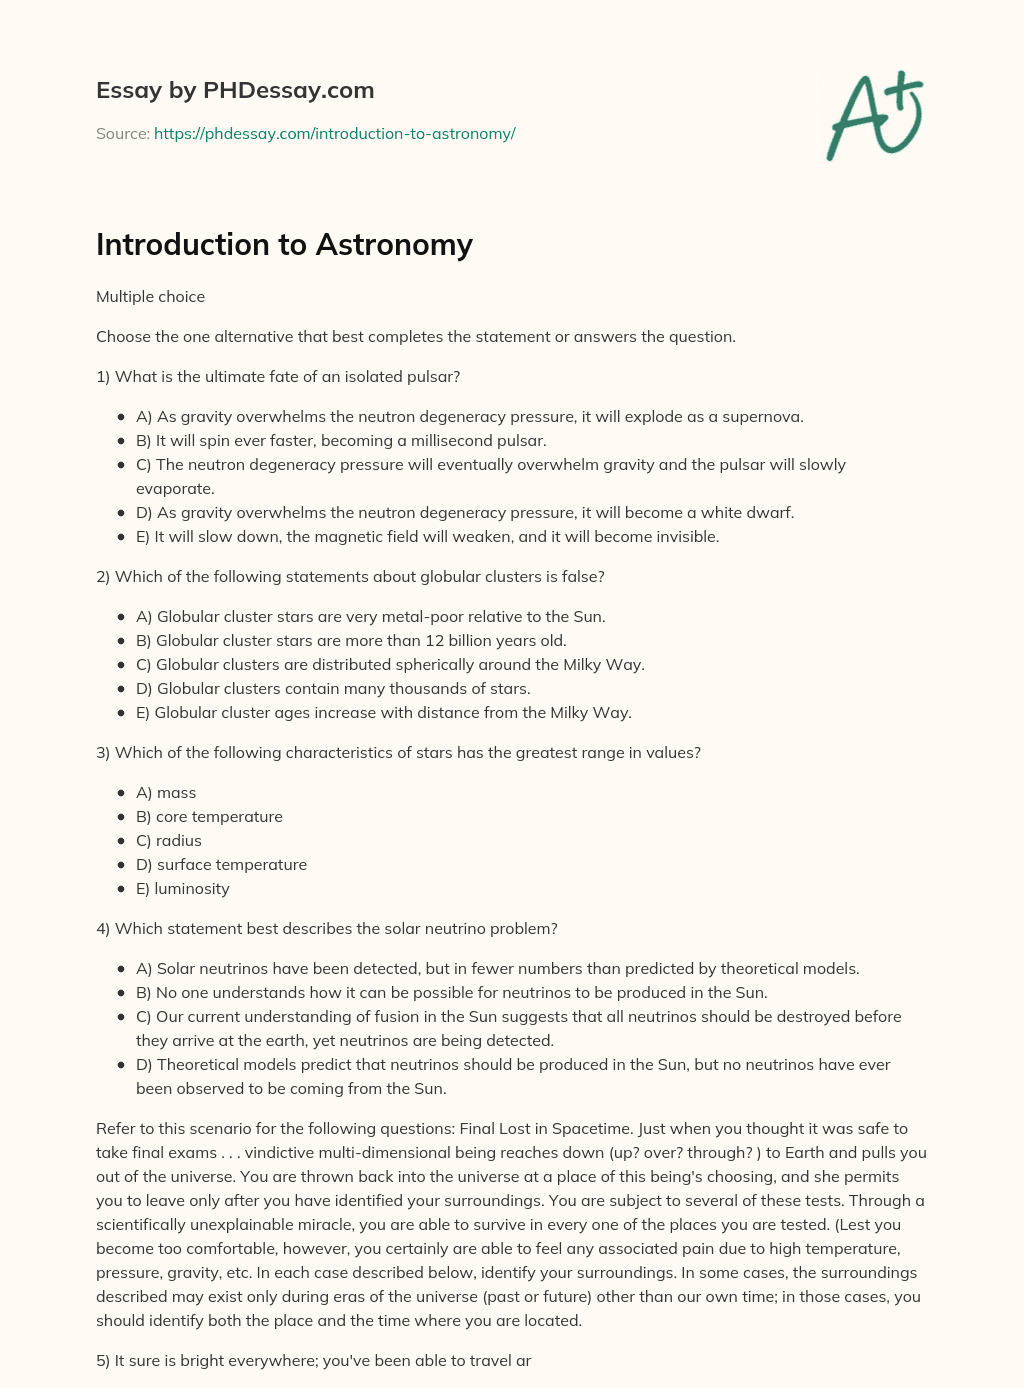 Introduction to Astronomy essay